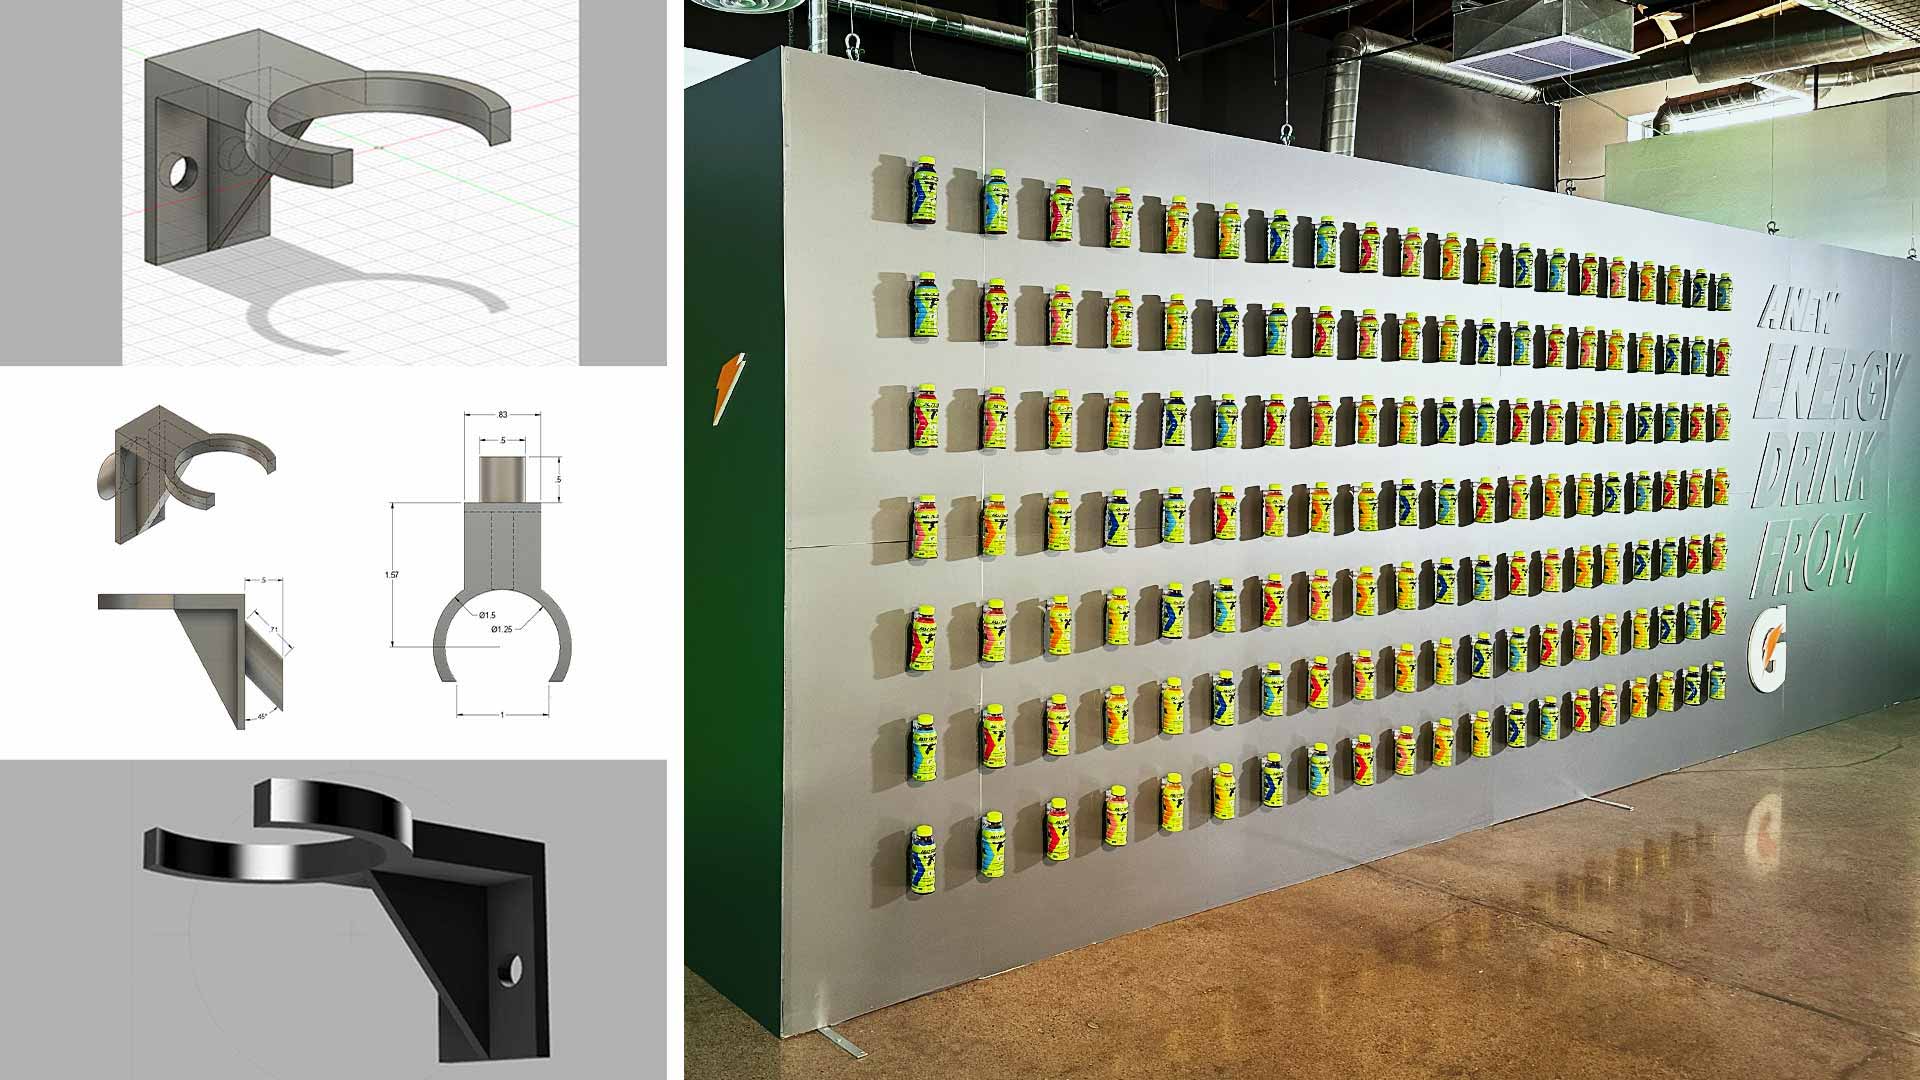 Cad images of the custom designed bottle clip alongside the finished wall of Fast Twitch bottles